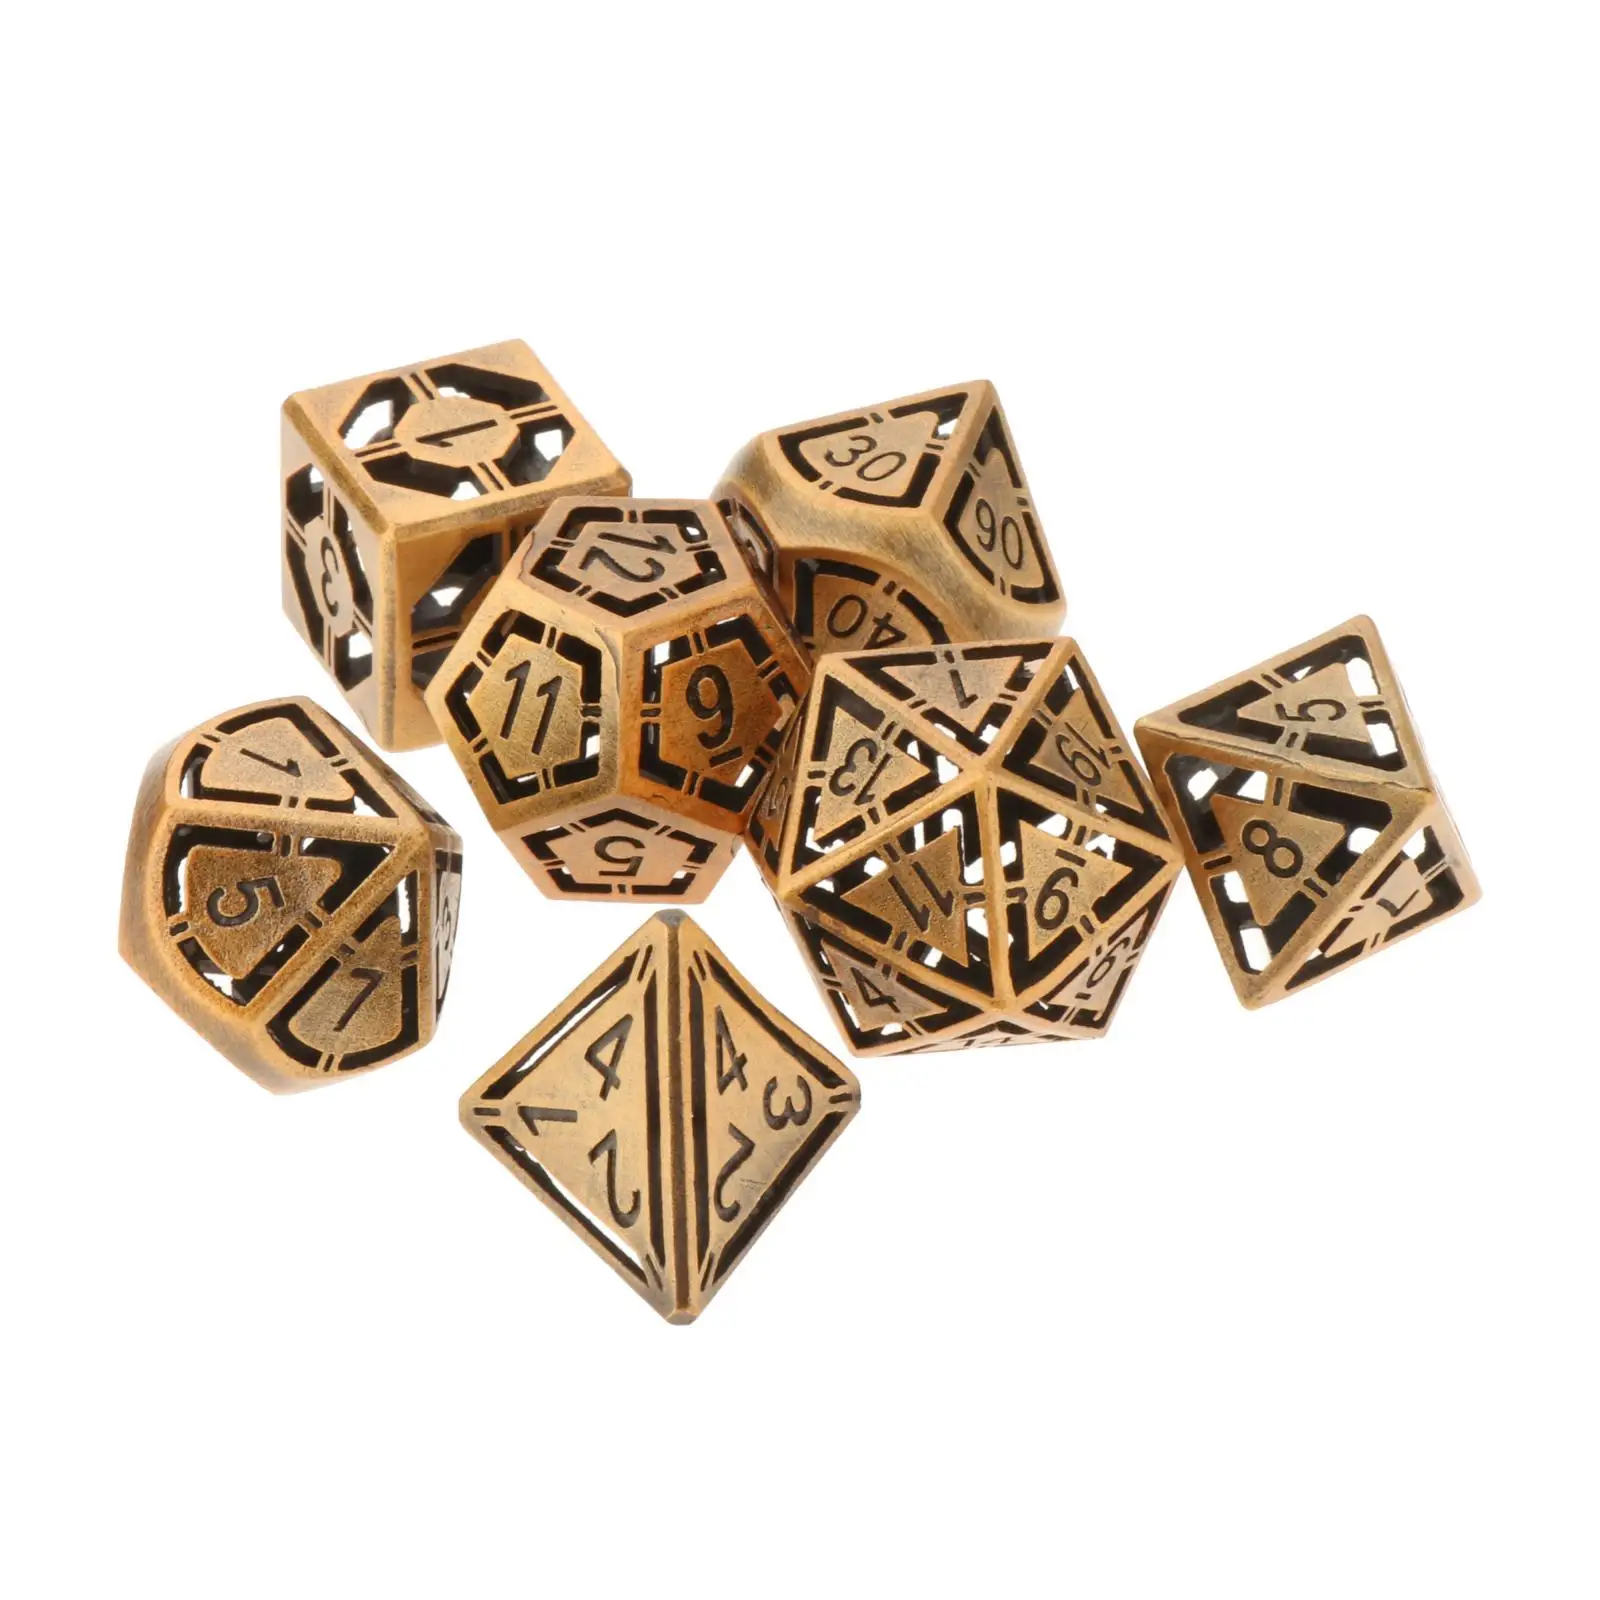 7x Multi-sided Zinc Alloy for Dragon Scales DND D&D PATHFINDERS RPG Dices